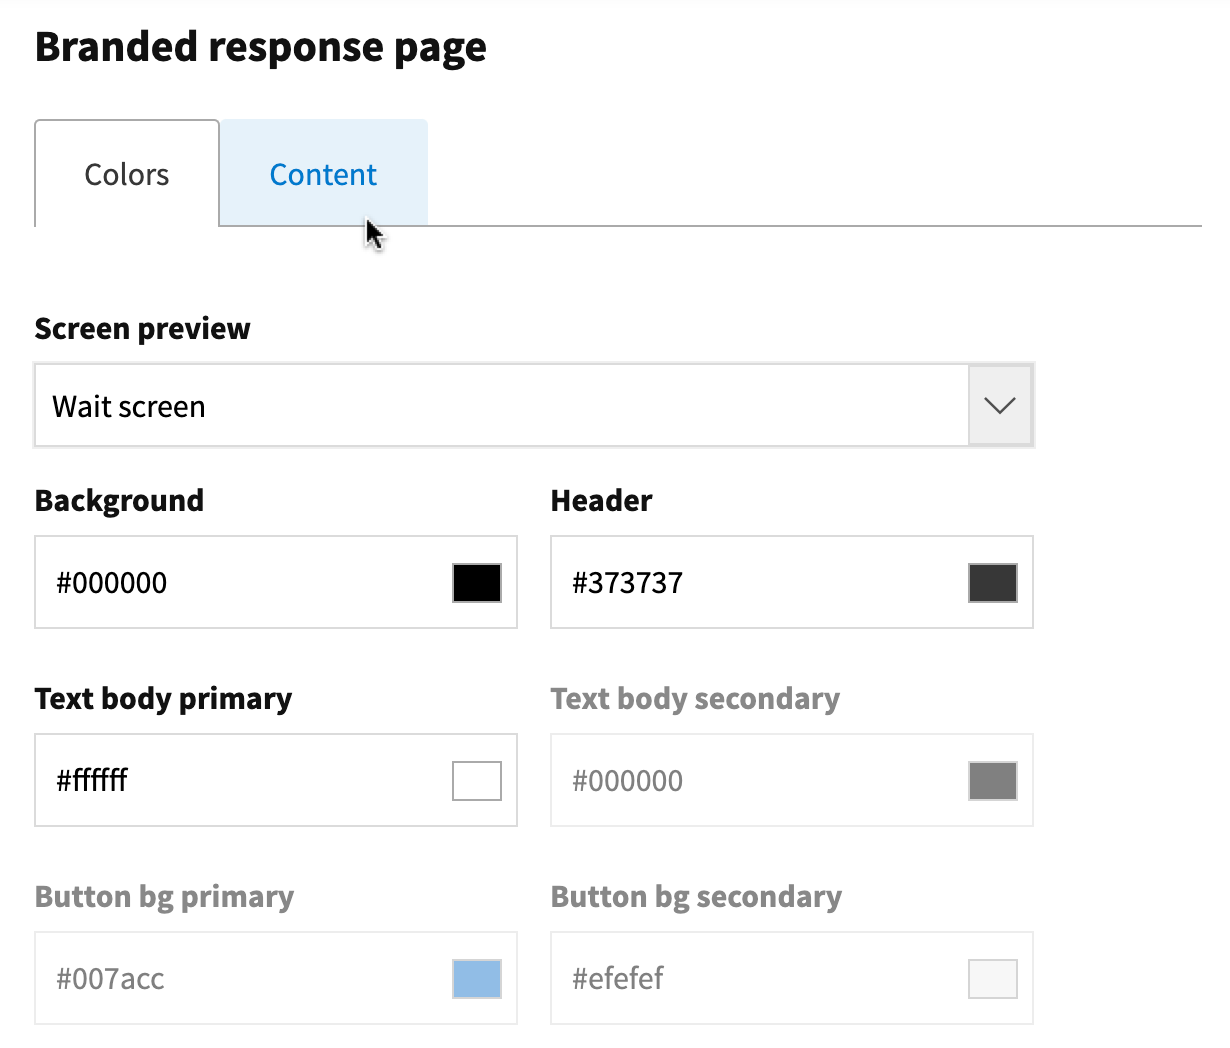 Branded response page Colors tab view